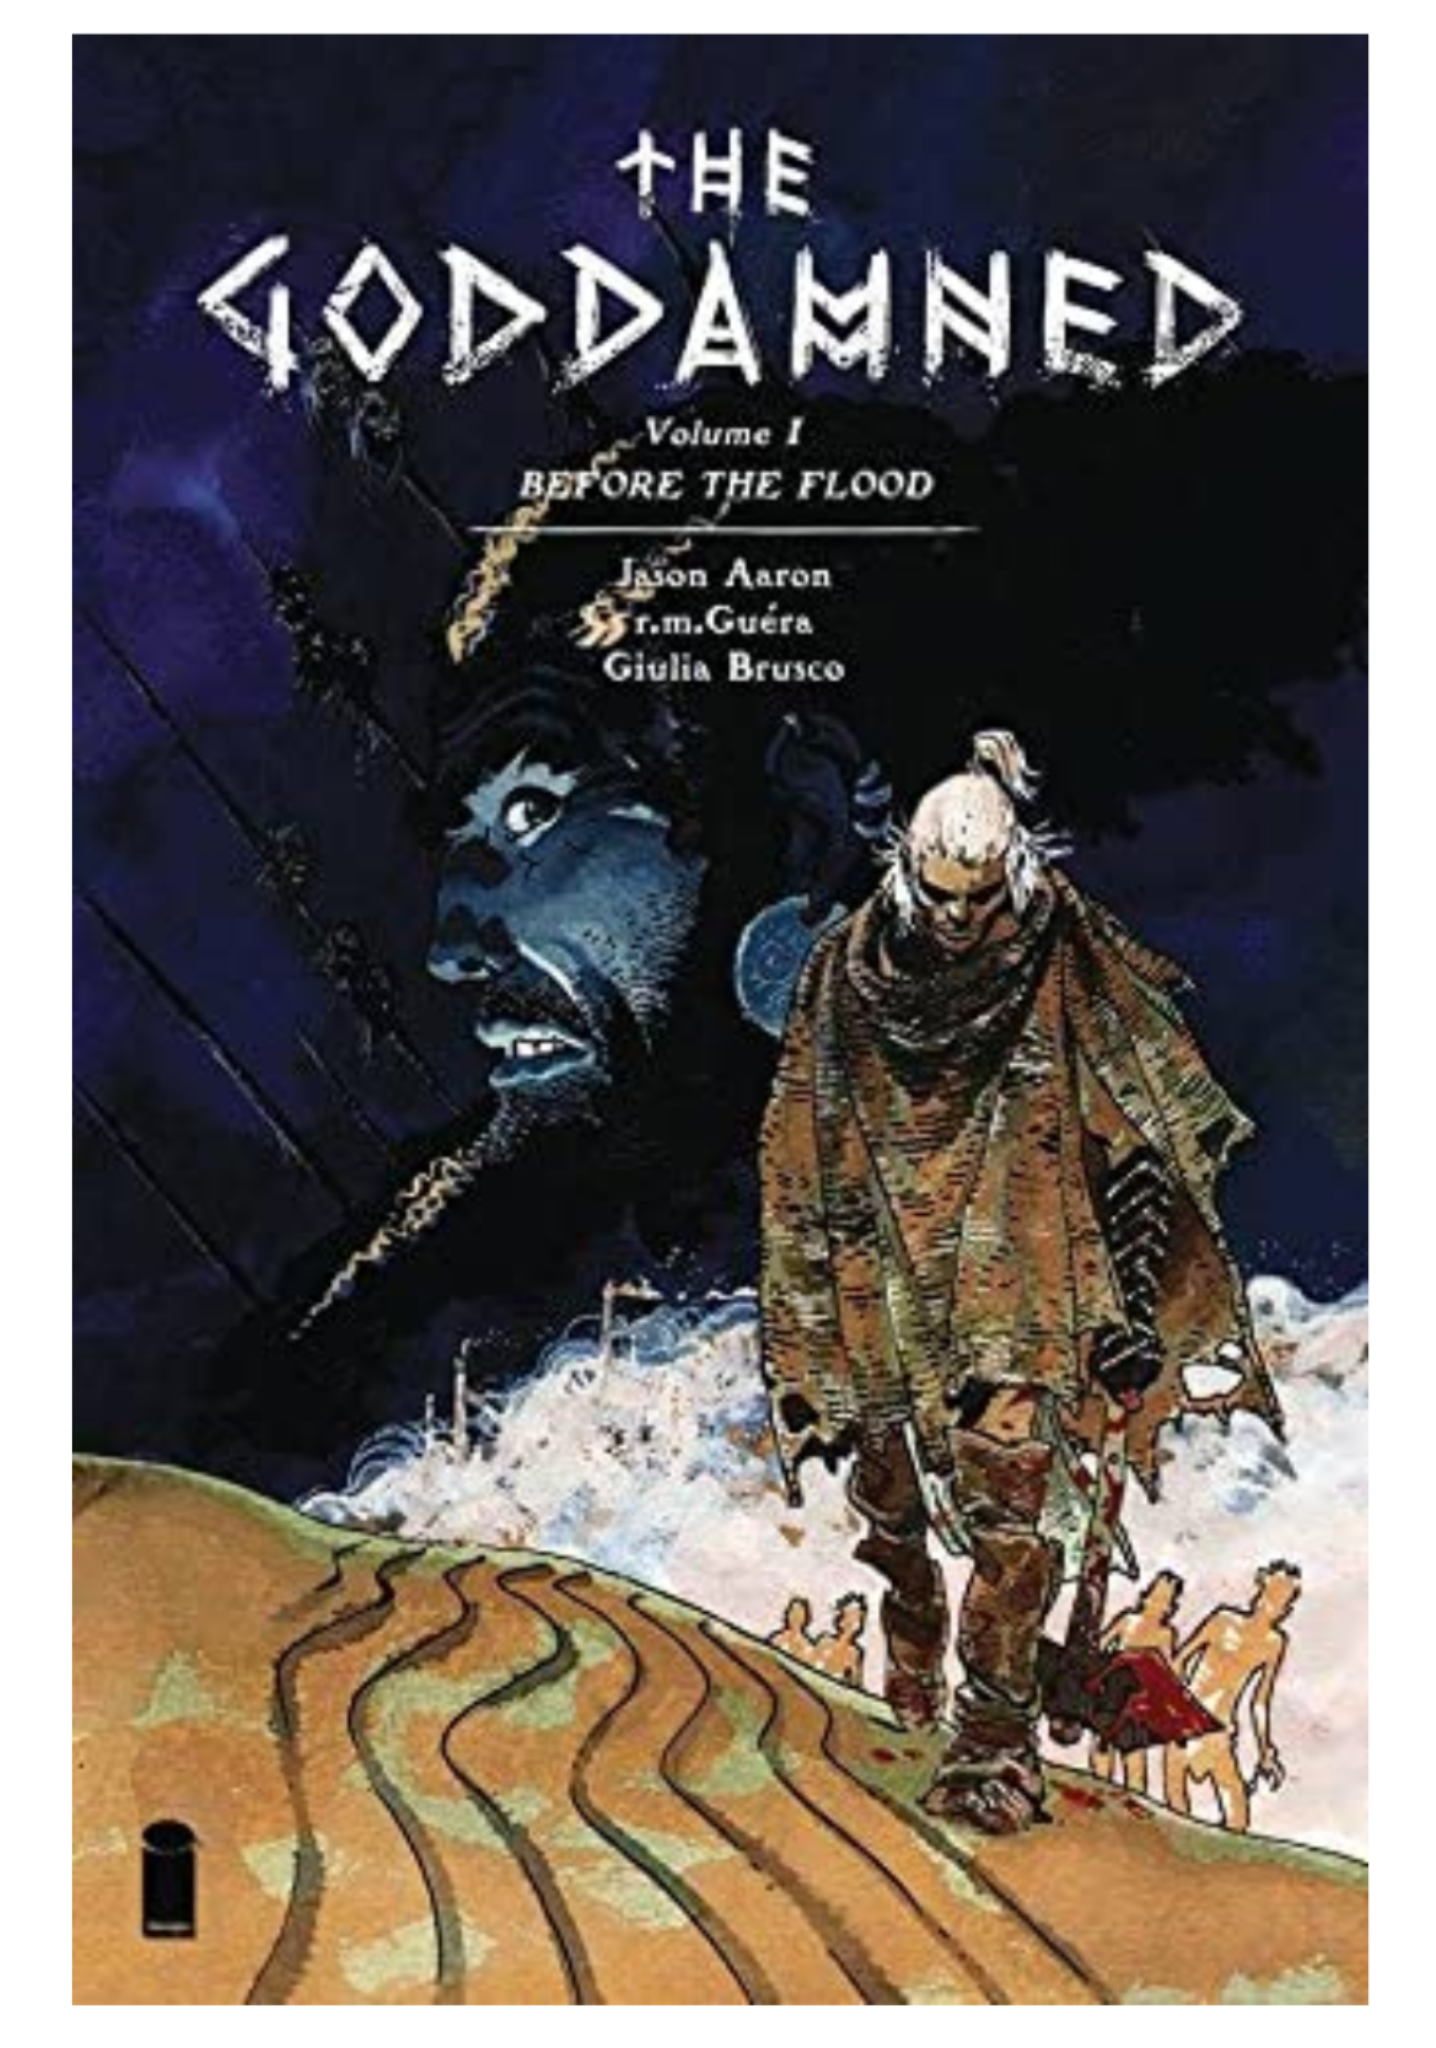 The Goddamned Vol 1 Before The Flood